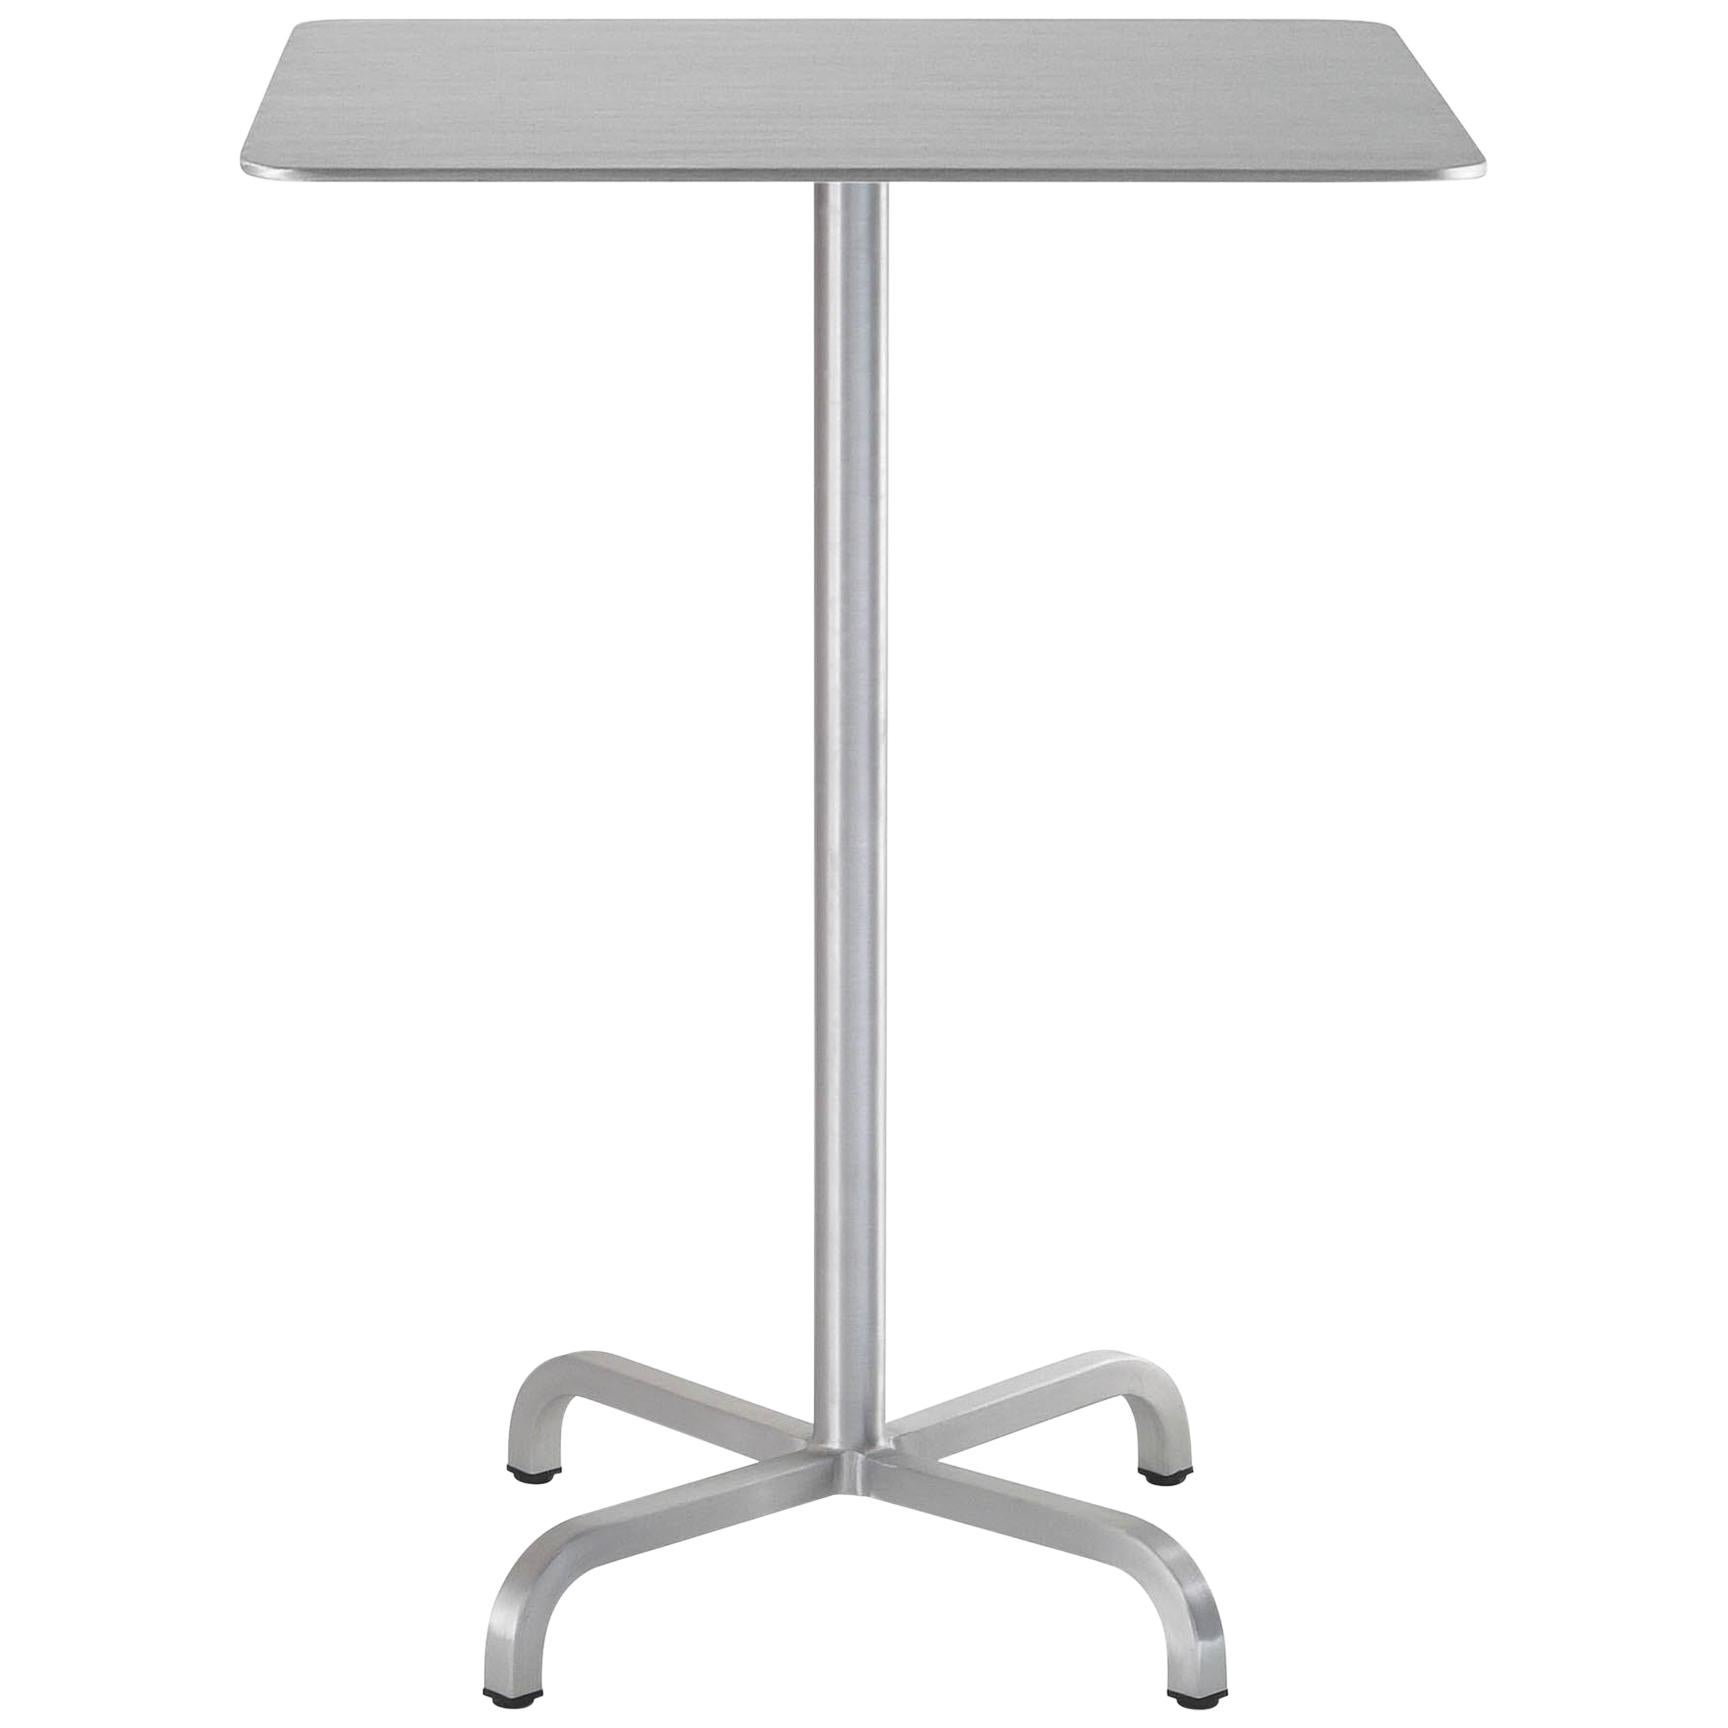 Emeco 20-06 Large Square Bar Table in Brushed Aluminum by Norman Foster 